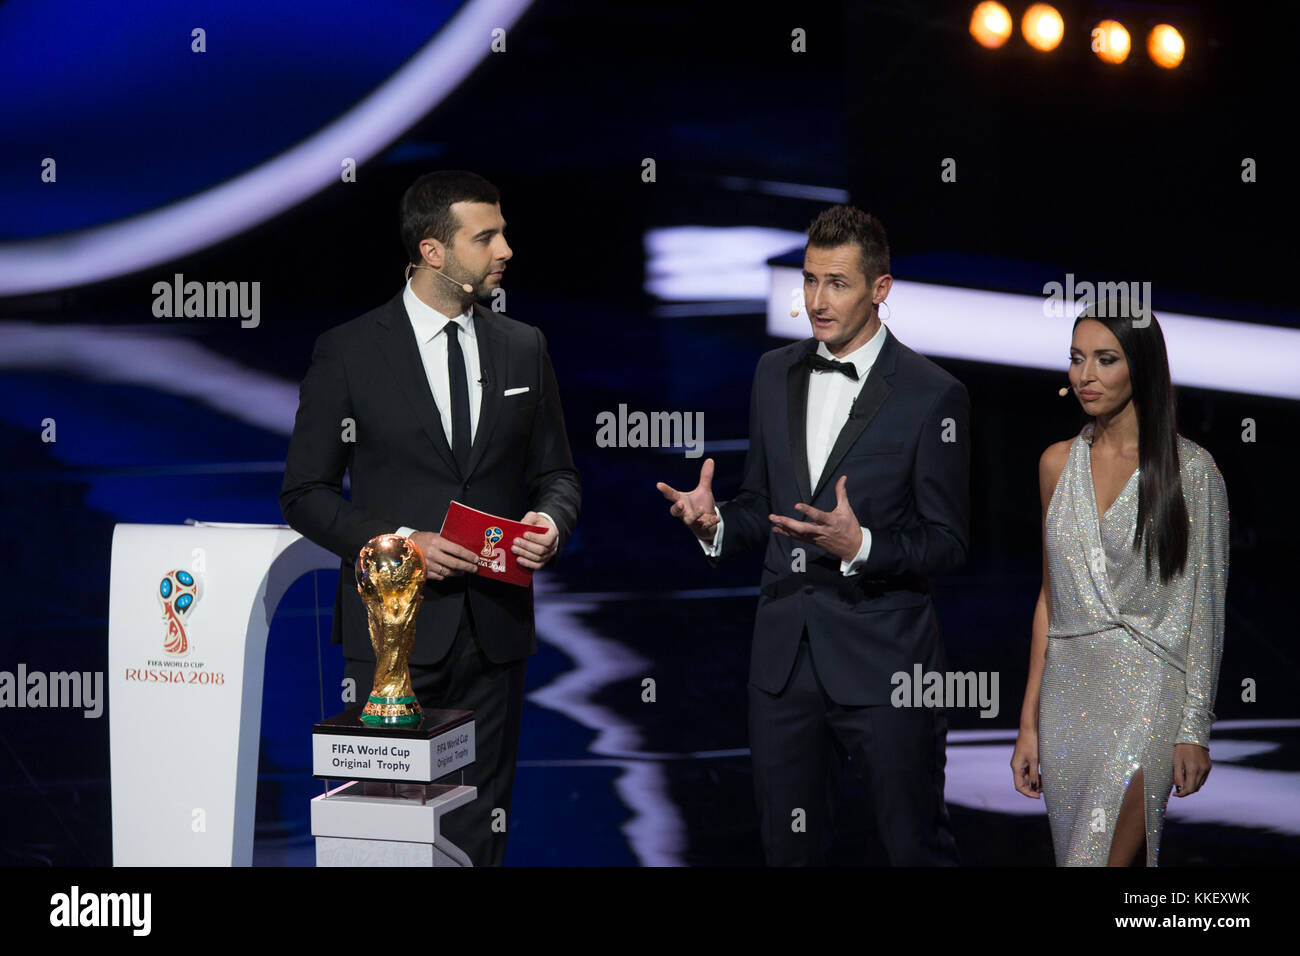 Moscow, Russia. 1st Dec, 2017. Germany's former soccer player Miroslav Klose (C) speaks after presented the 2018 FIFA World Cup trophy during the Final Draw of the FIFA World Cup 2018 at the Kremlin Palace in Moscow, capital of Russia, Dec. 1, 2017. Credit: Bai Xueqi/Xinhua/Alamy Live News Stock Photo